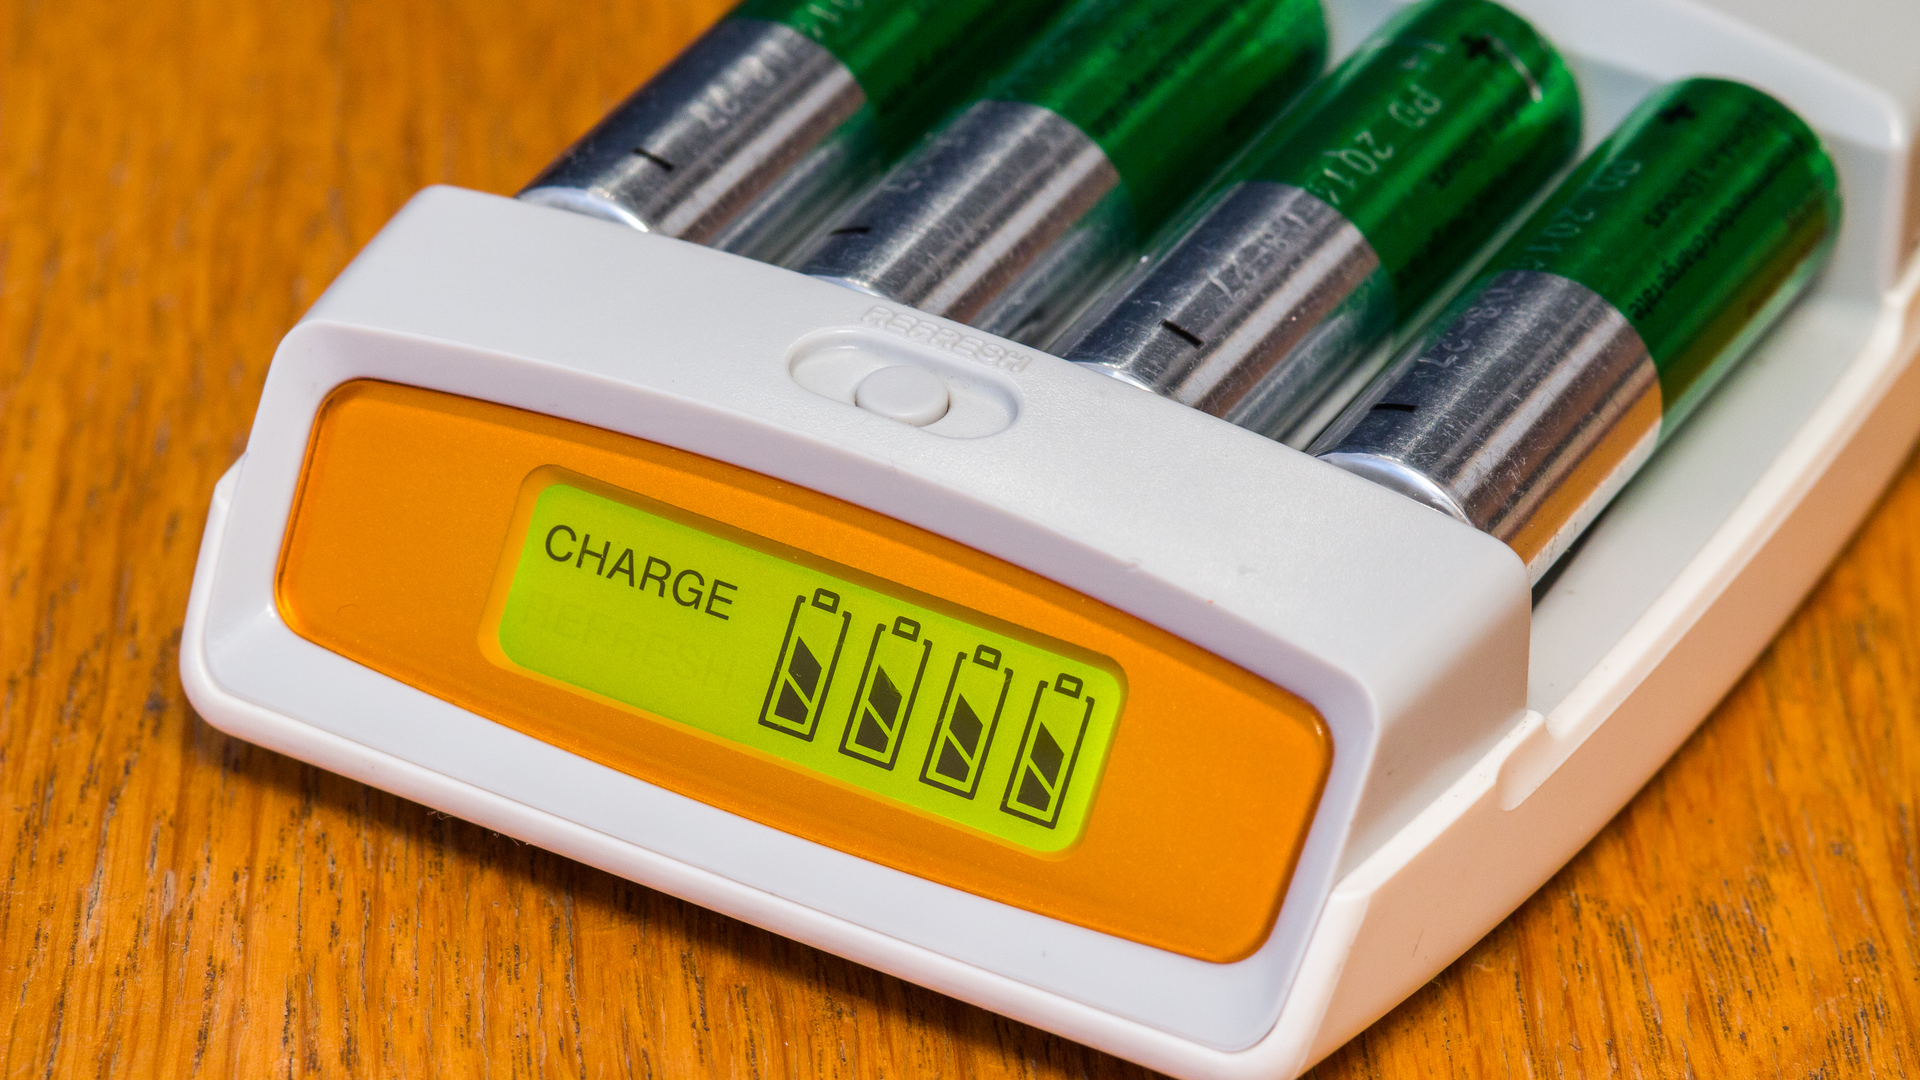 A set of rechargeable batteries in a charger